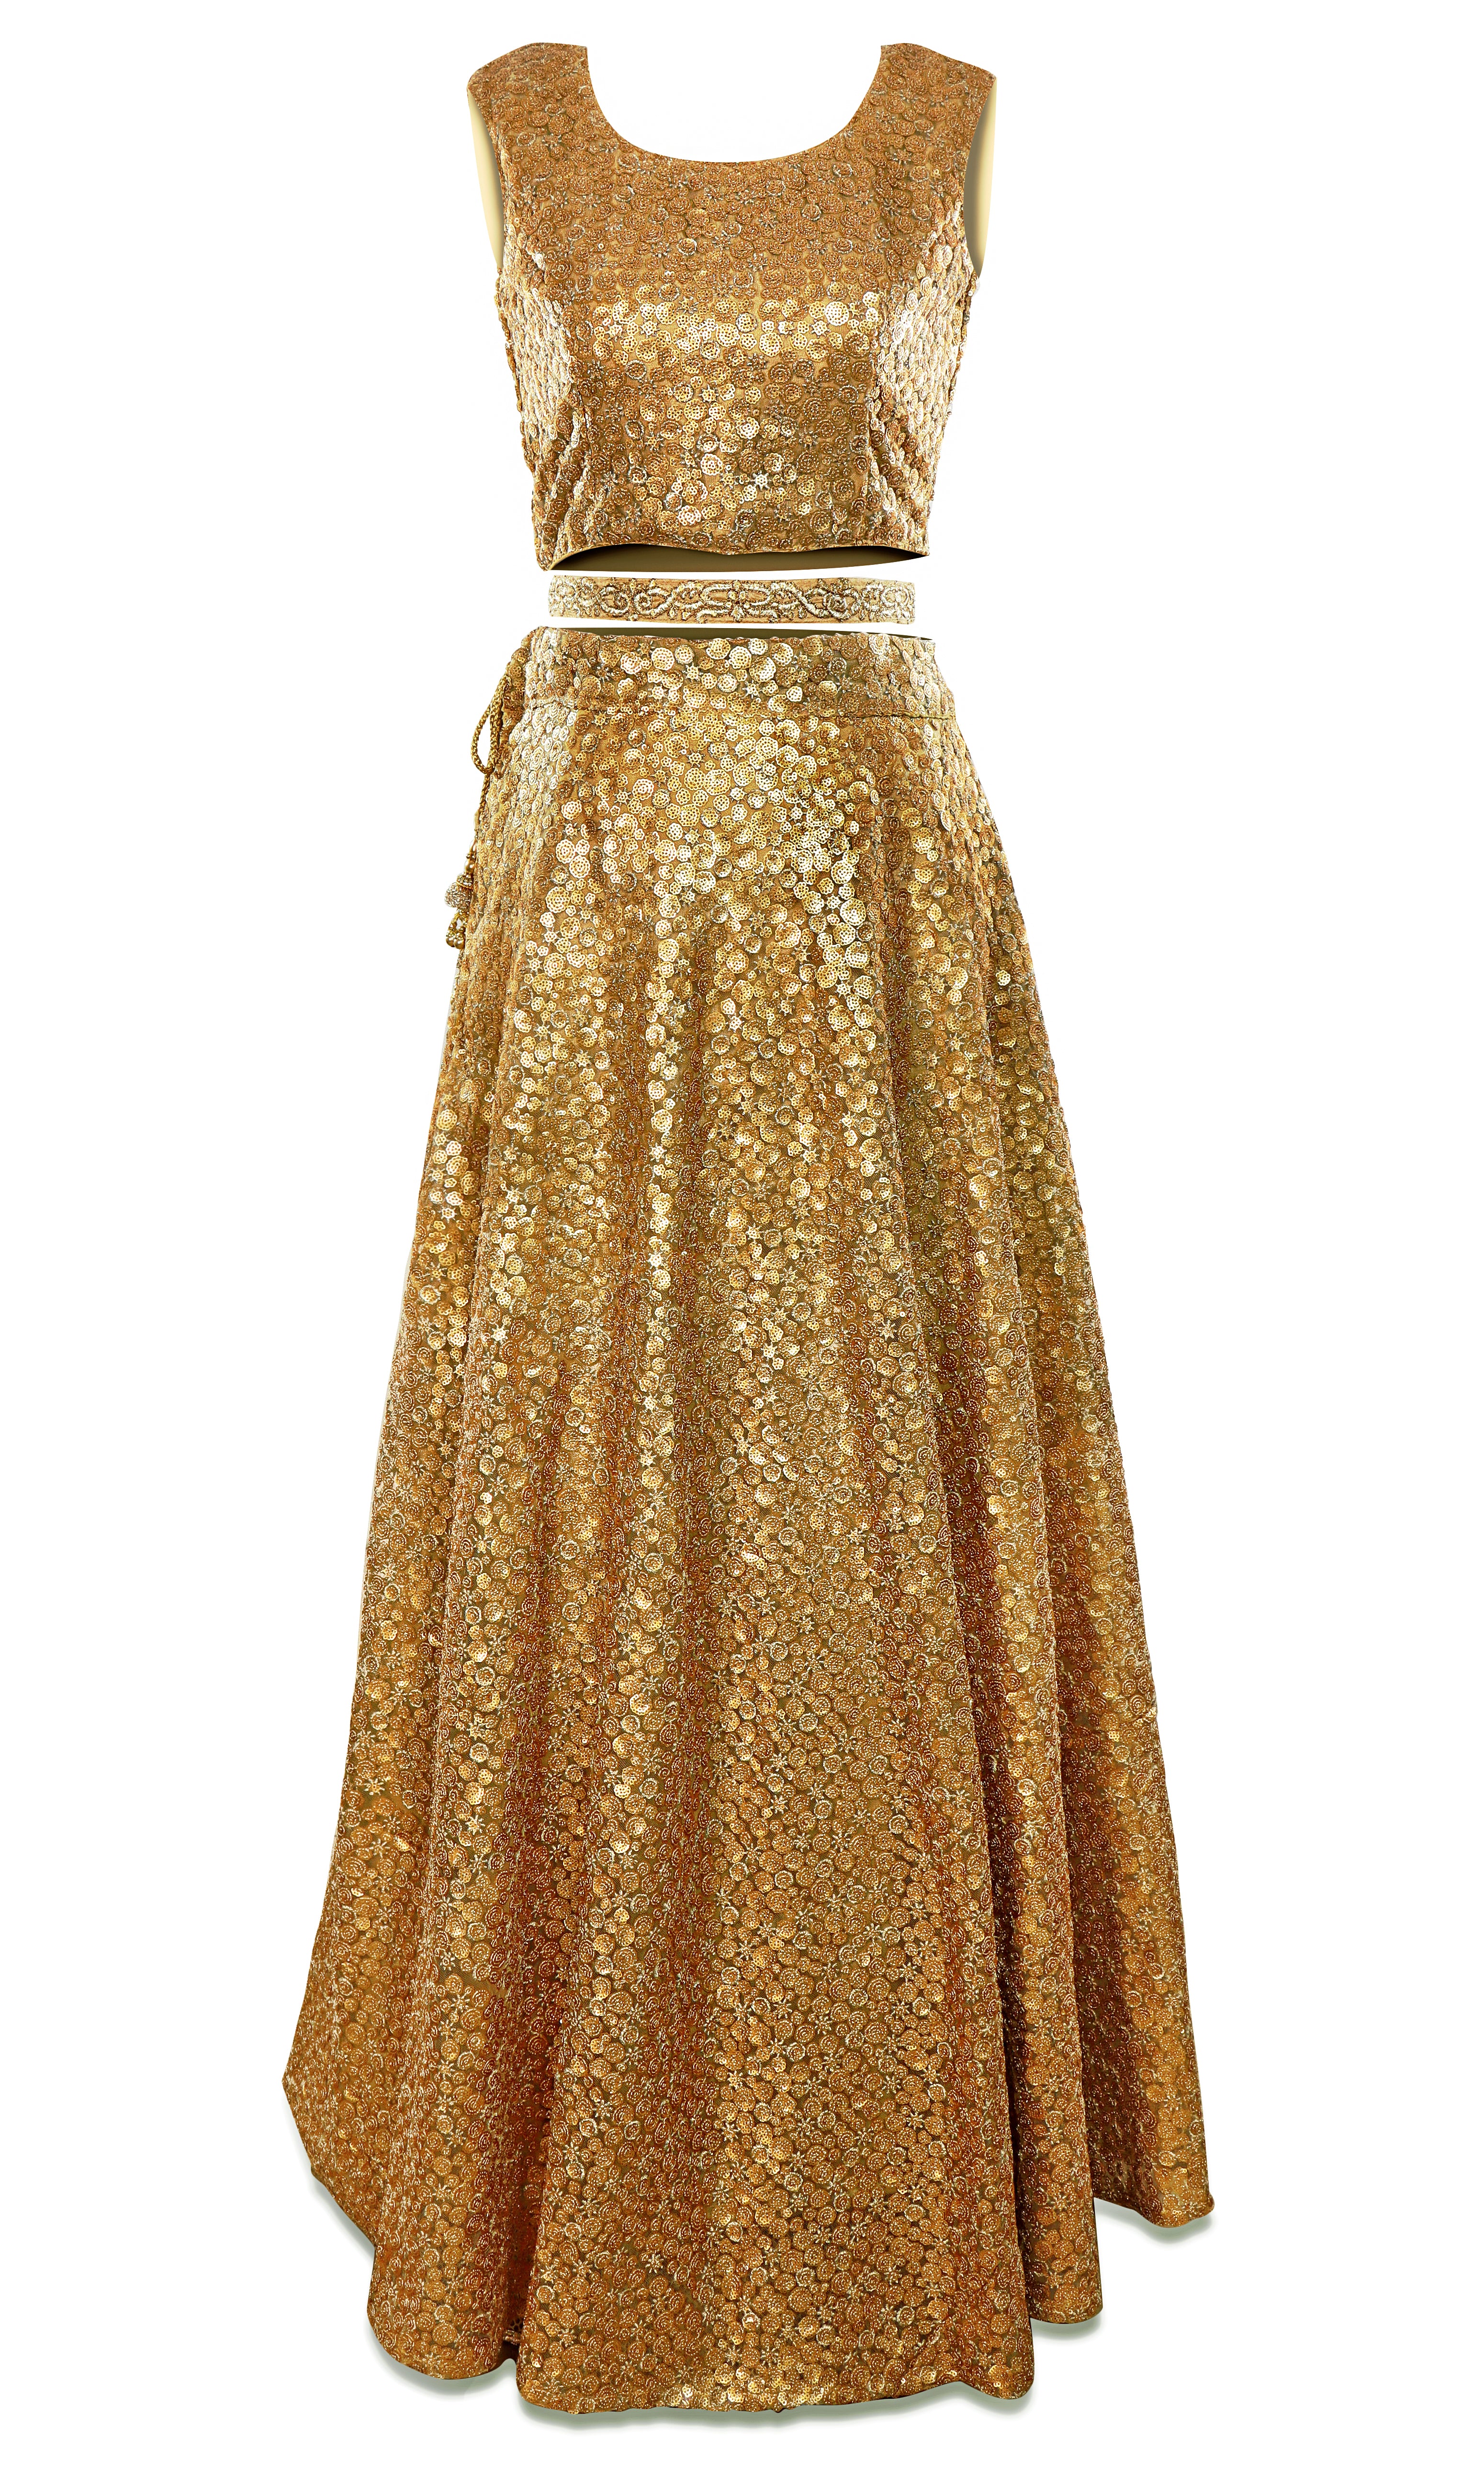 Gold lehenga is covered in glittering gold embroidery and comes with a stunning pale pink dupatta.